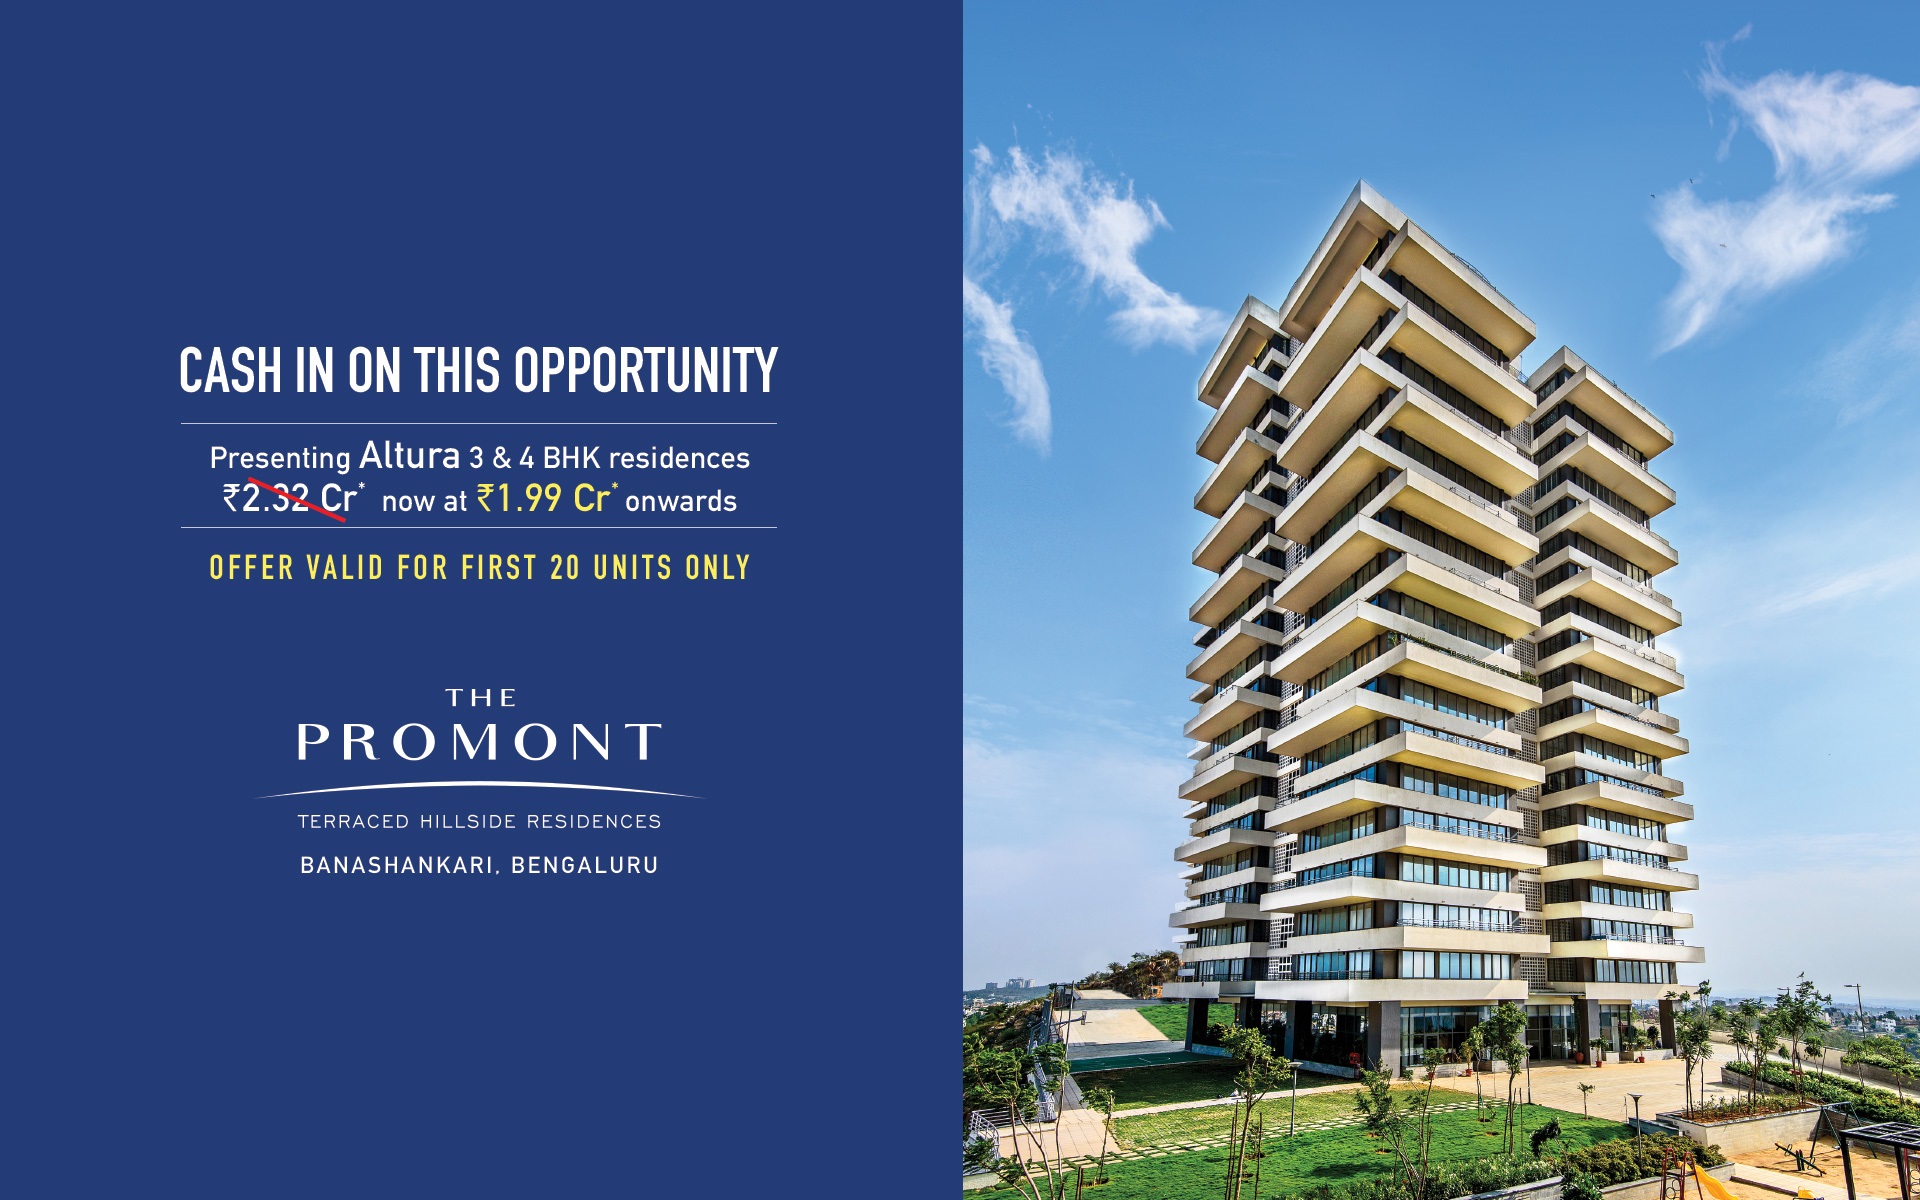 Presenting altura 3 & 4 bhk residences now at Rs. 1.99 Cr. at Tata The Promont in Bangalore